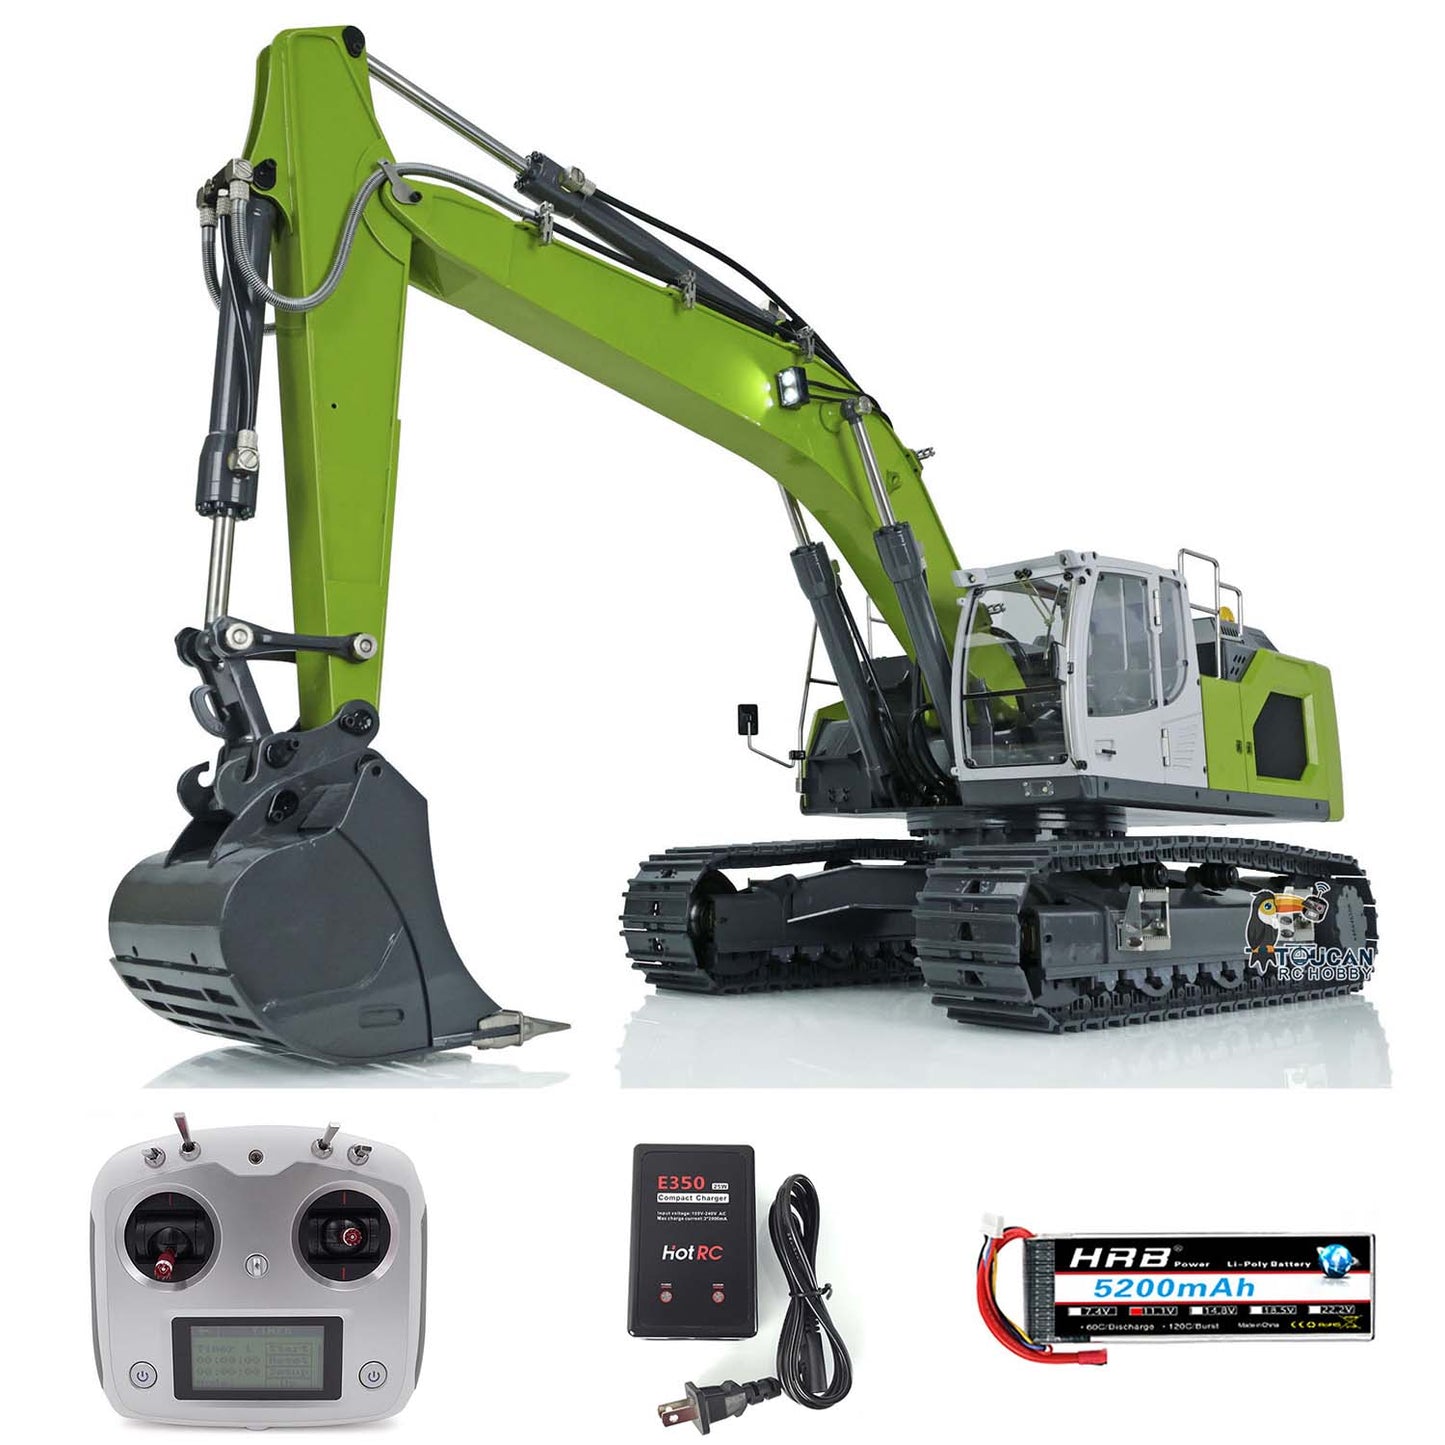 1/14 Hydraulic RC Excavator L945 Metal RTR Construction Vehicles Radio Controlled Toys Remote Control Trucks Models Transmitter Battery